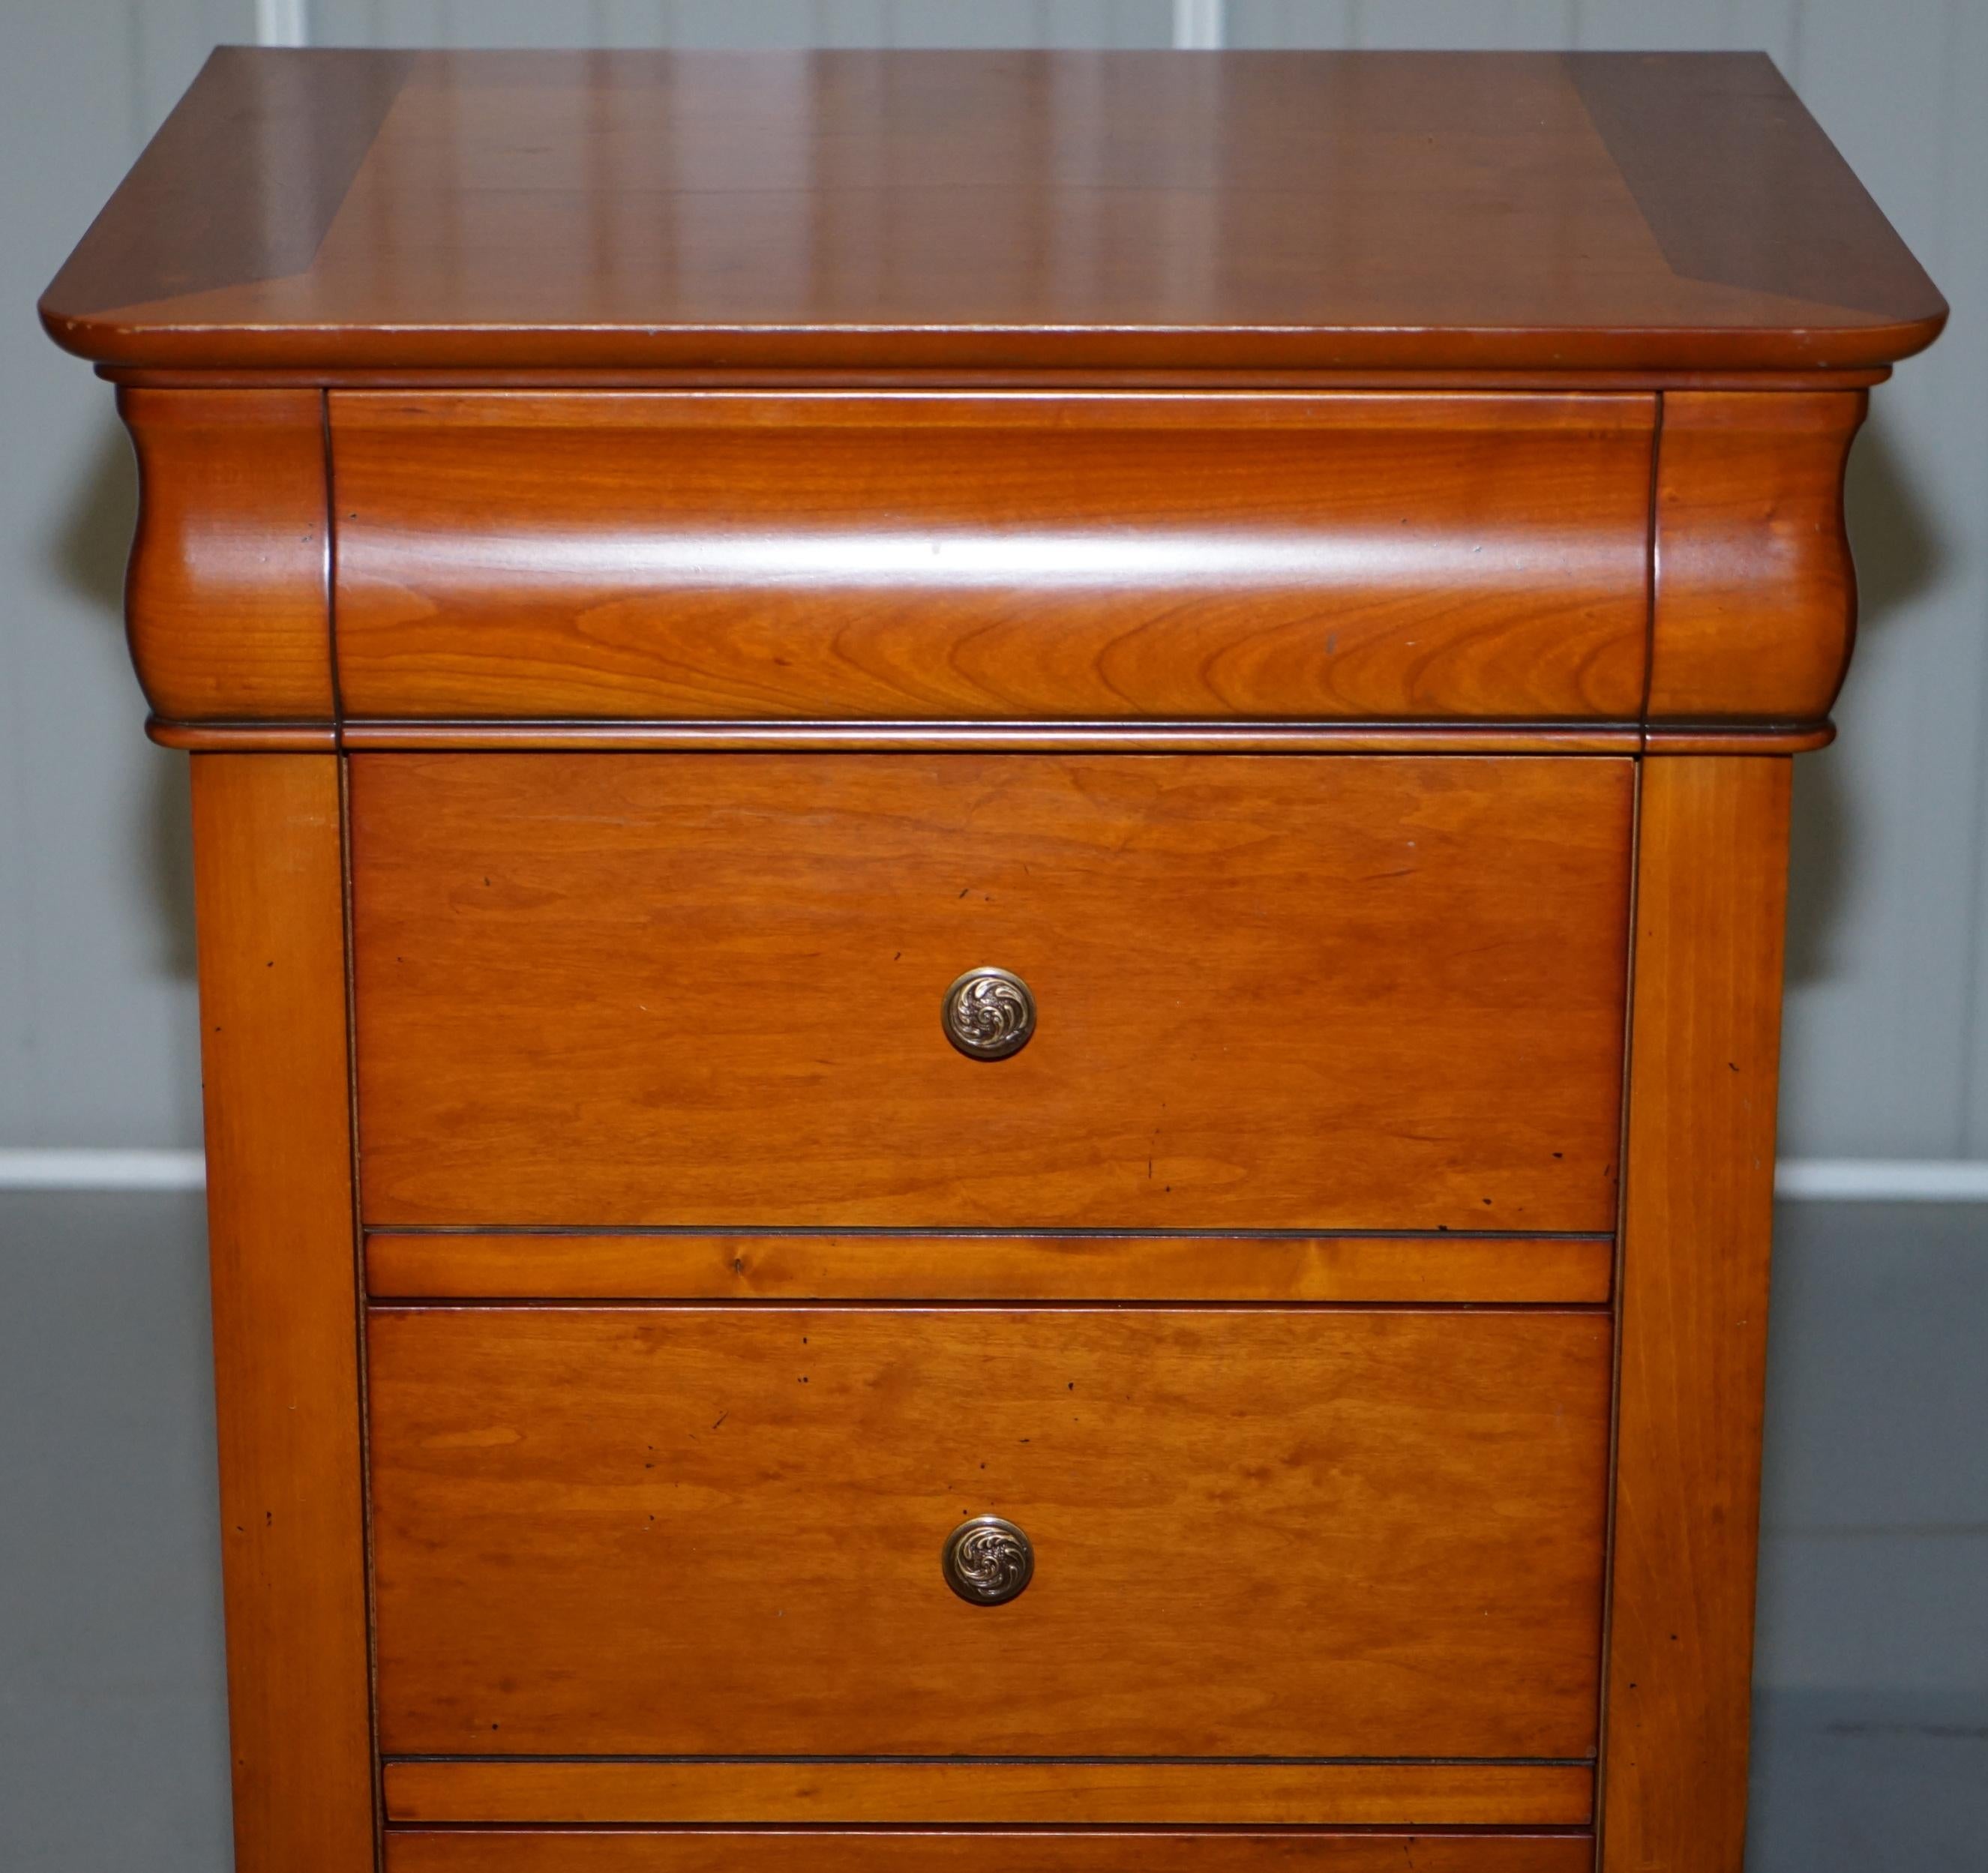 Modern Pair of Large Solid Cherry Wood Bedside Table Chest of Drawers Part of a Suite